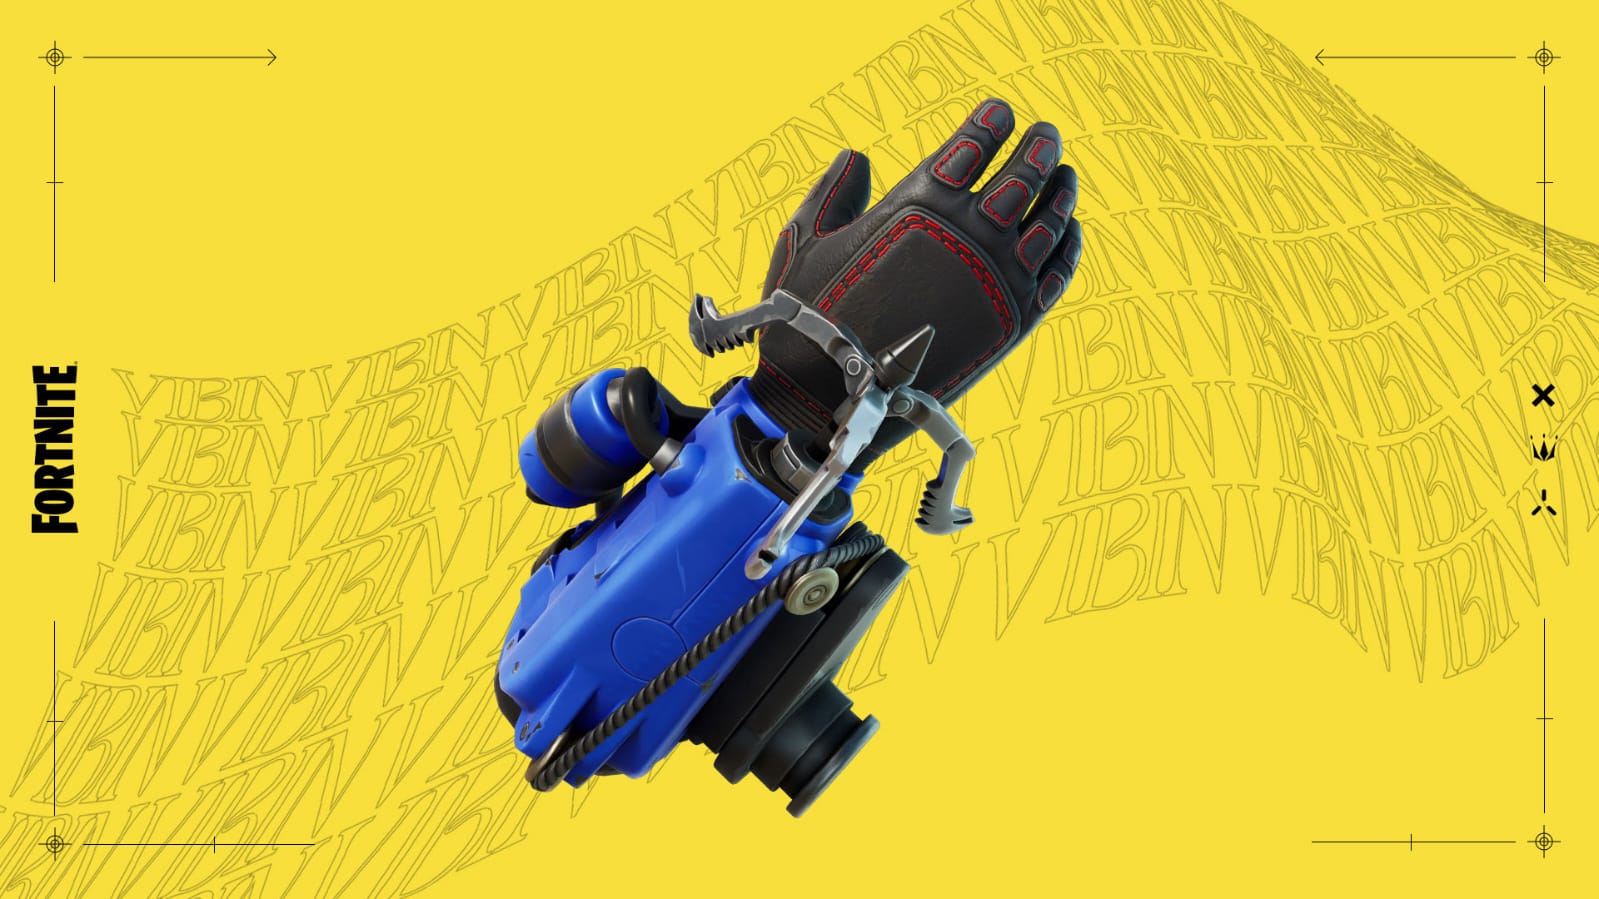 How to Swing 50 meters or more with Grapple Glove without Touching the ground in Fortnite Chapter 3 Season 3